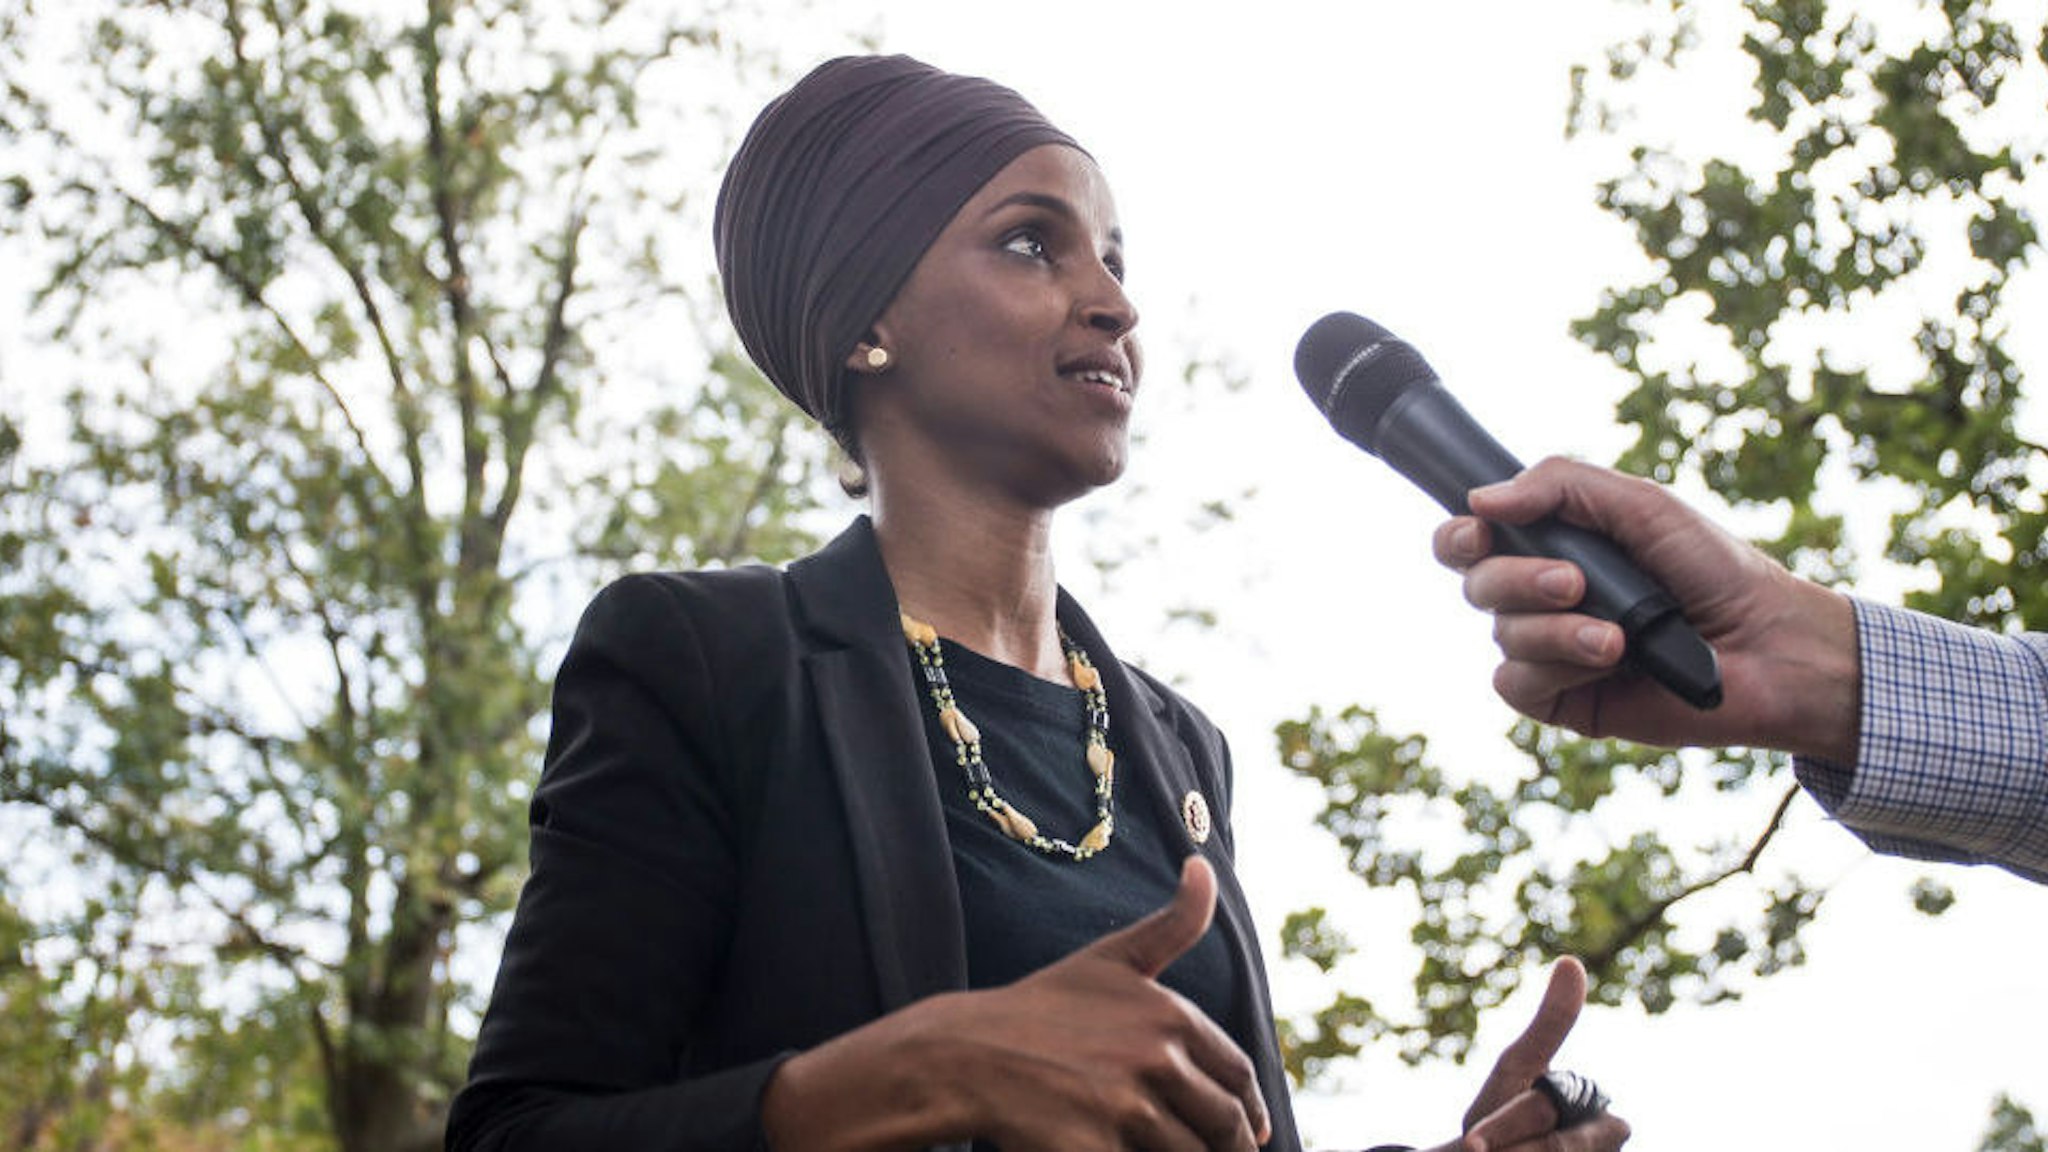 U.S. Rep. Ilhan Omar (D-MN) speaks to members of the press after delivering remarks at a rally hosted by Progressive Democrats of America on Capitol Hill on September 26, 2019 in Washington, DC. House Speaker Nancy Pelosi (D-CA) announced yesterday the beginning of a formal impeachment inquiry against President Donald Trump. (Photo by Zach Gibson/Getty Images)